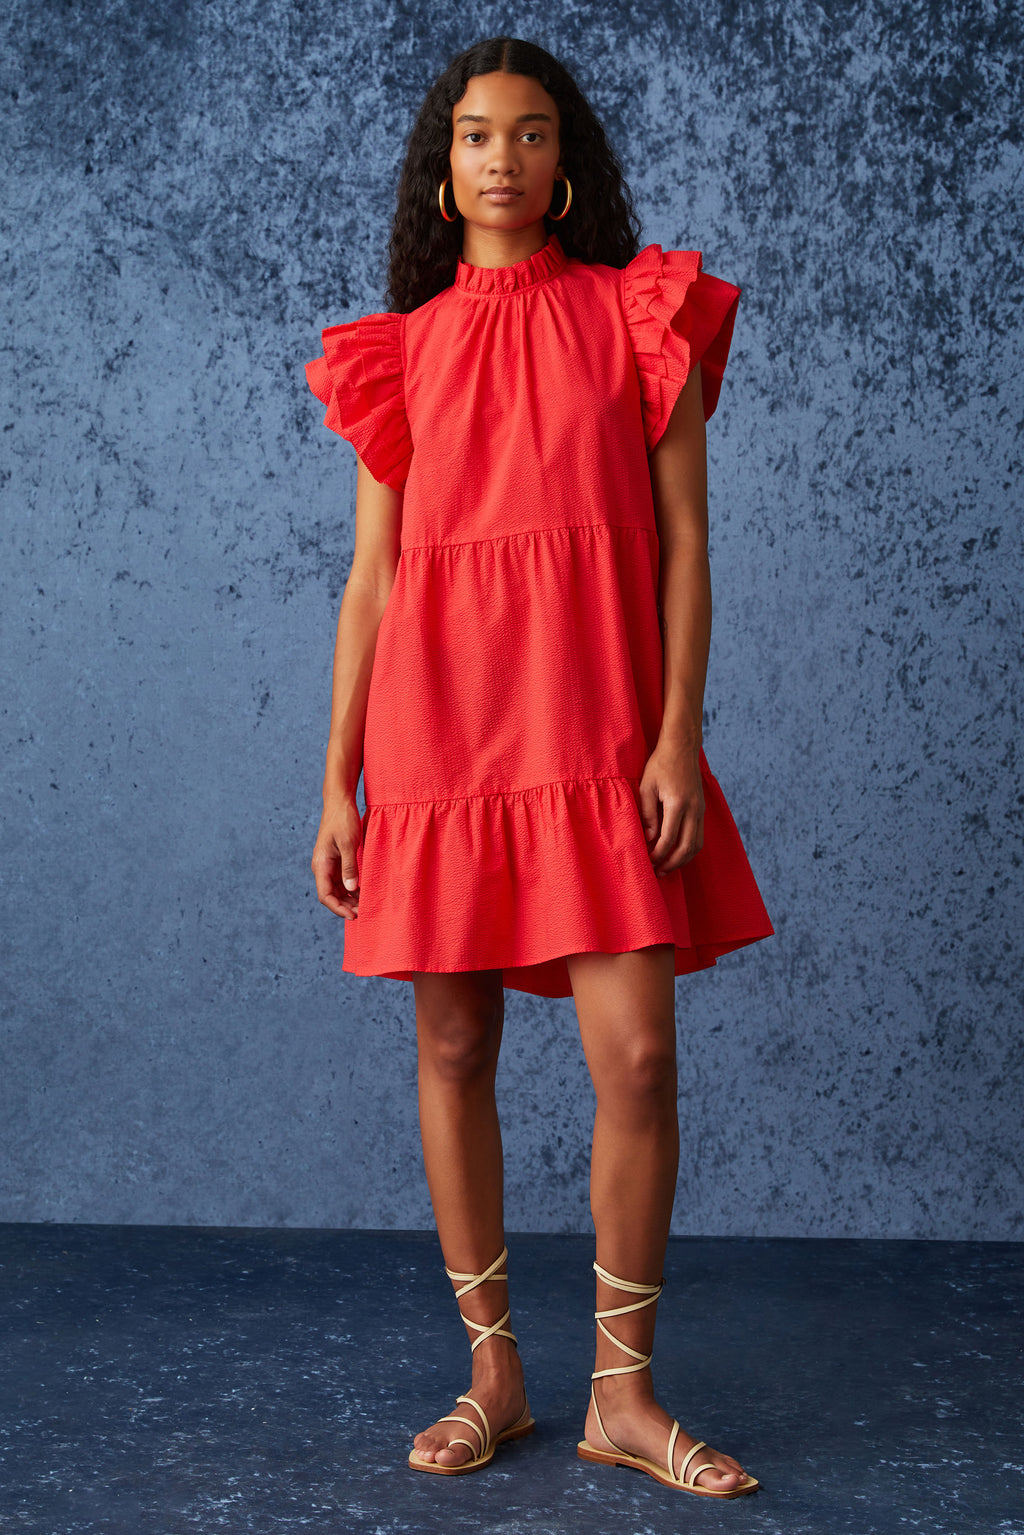 Short dress with short tiered ruffle sleeves and a high ruffled neckline in a bright red